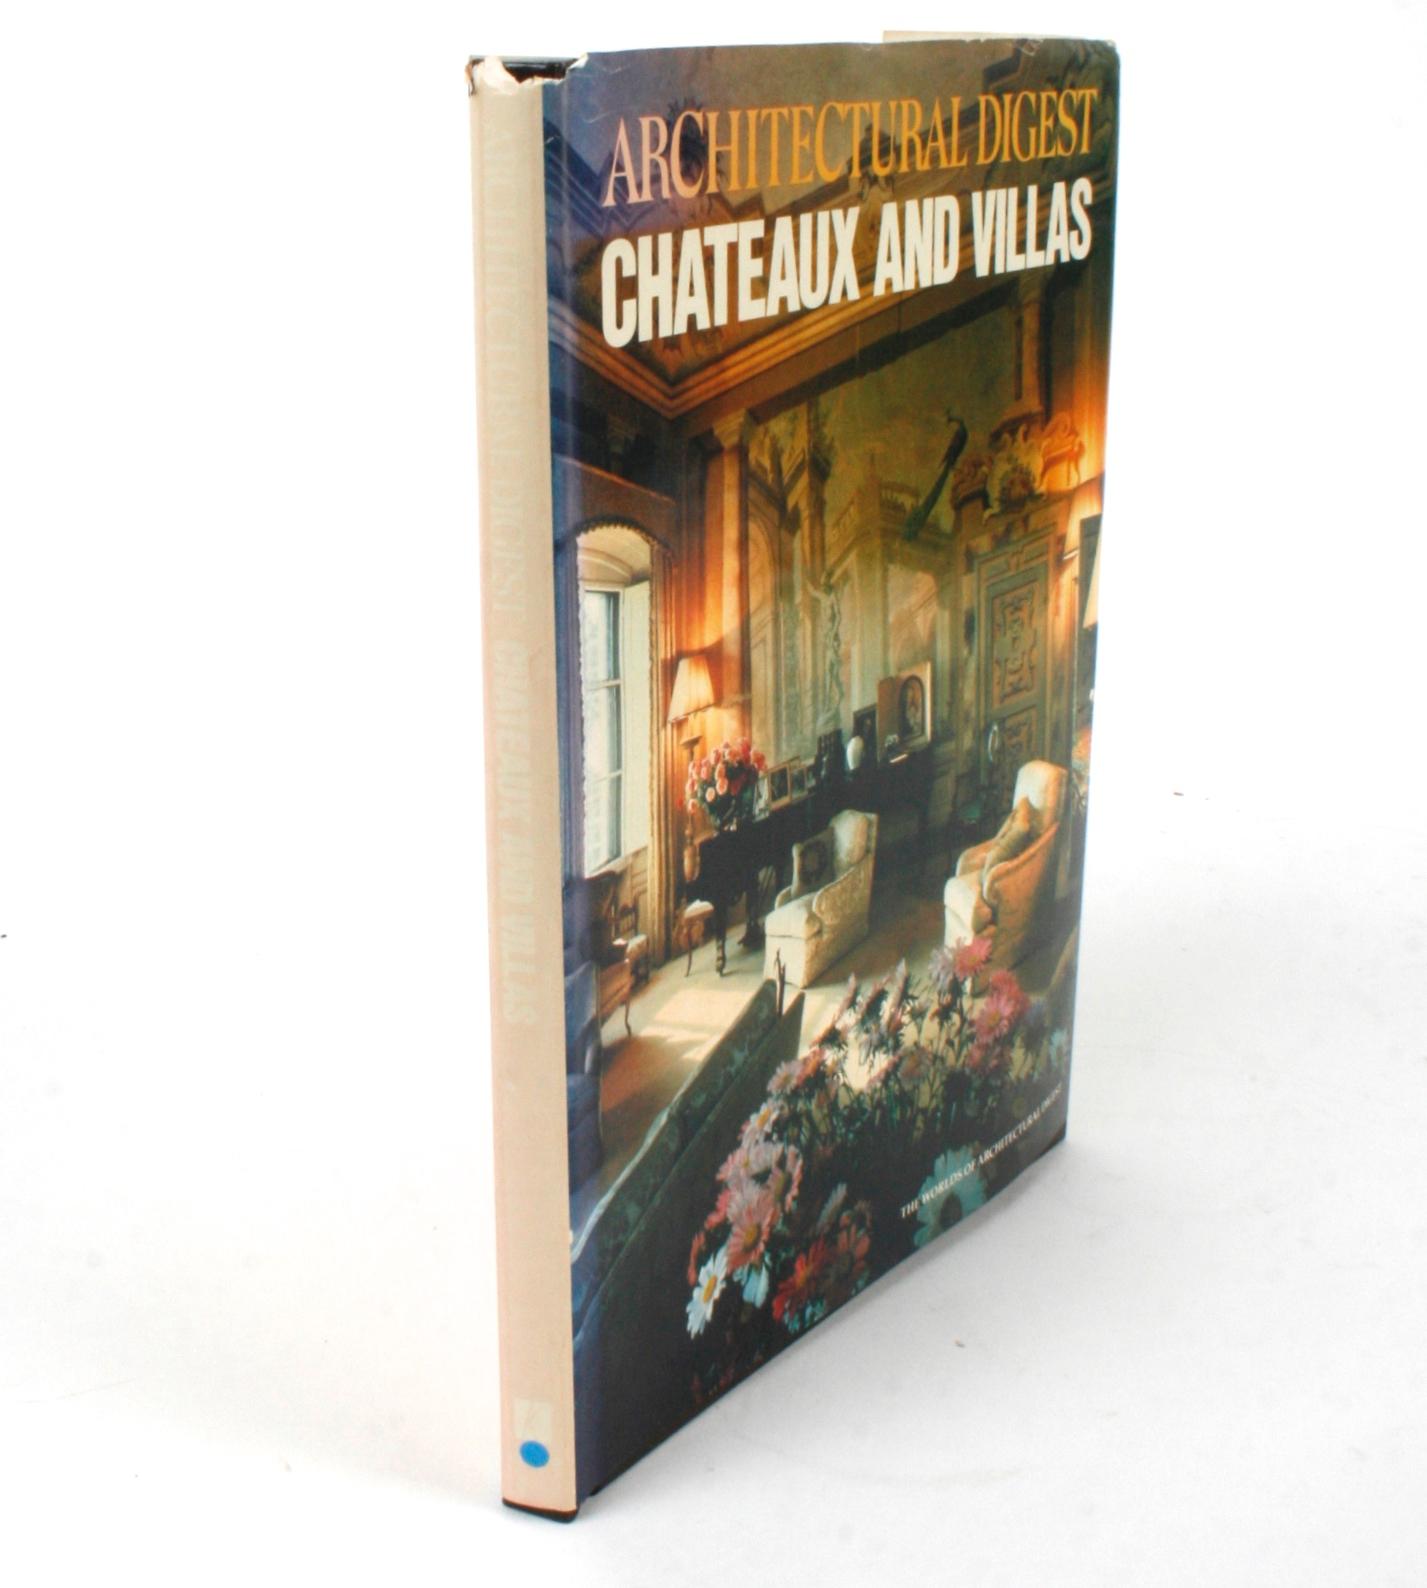 Architectural Digest Chateaux and Villas, Stated First Edition 12